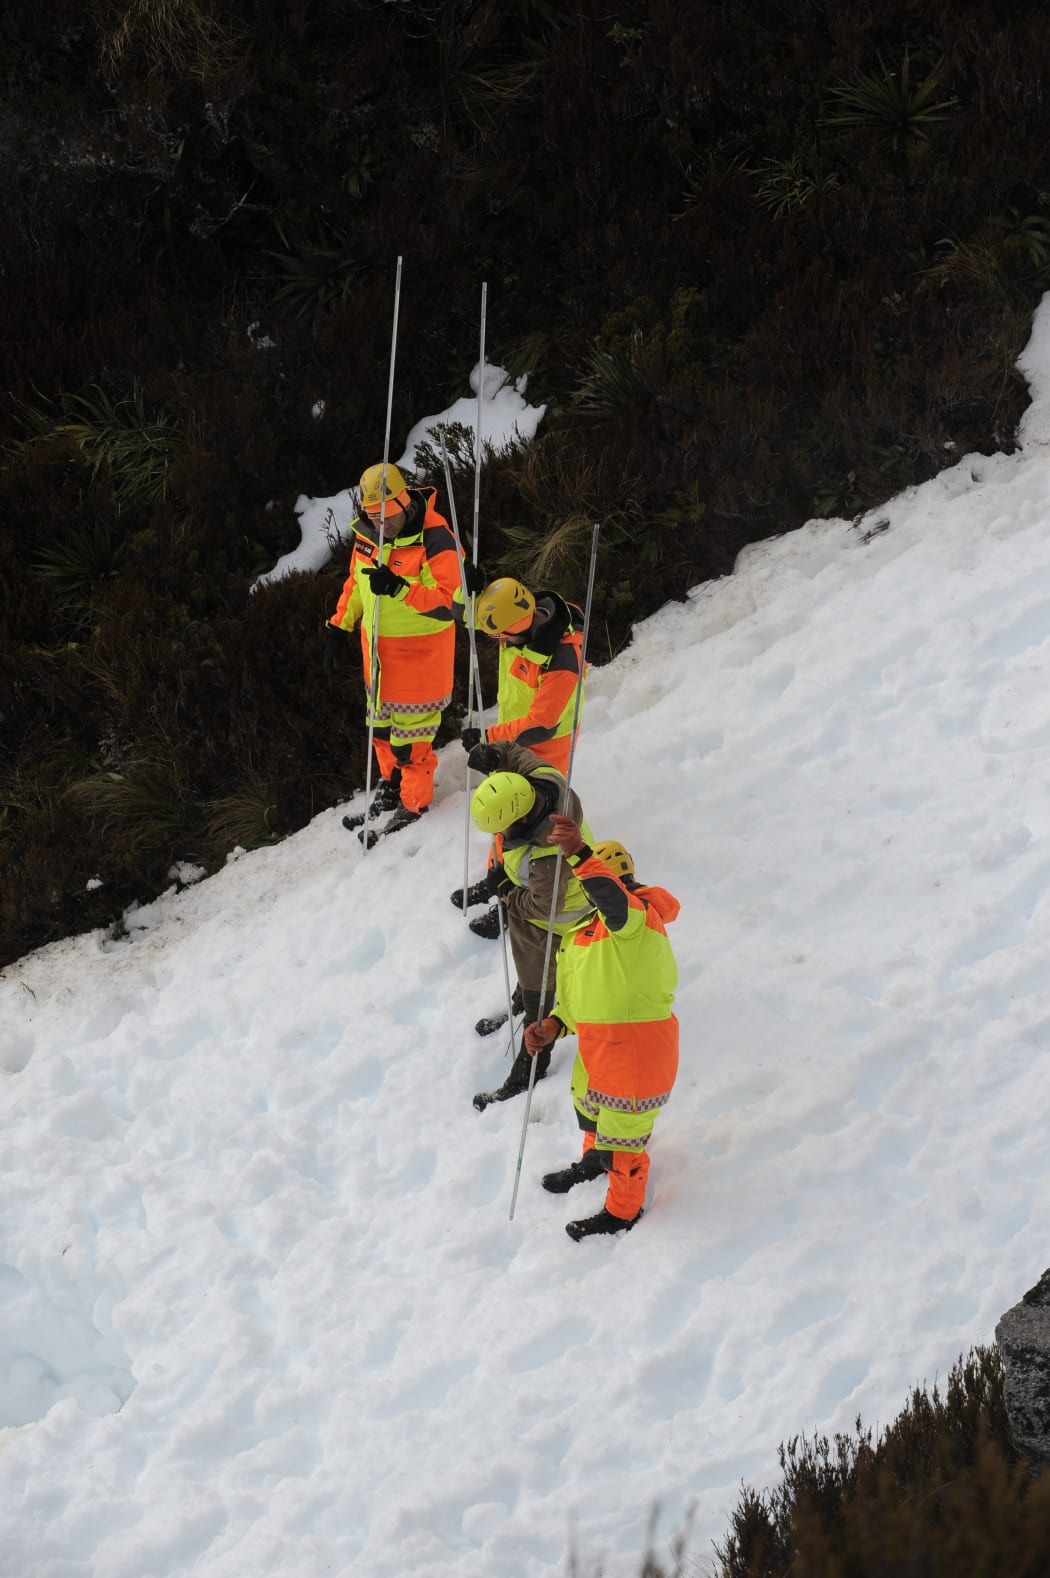 A photo released by police shows search and rescue workers near the site of the avalanche in Fiordland National Park.